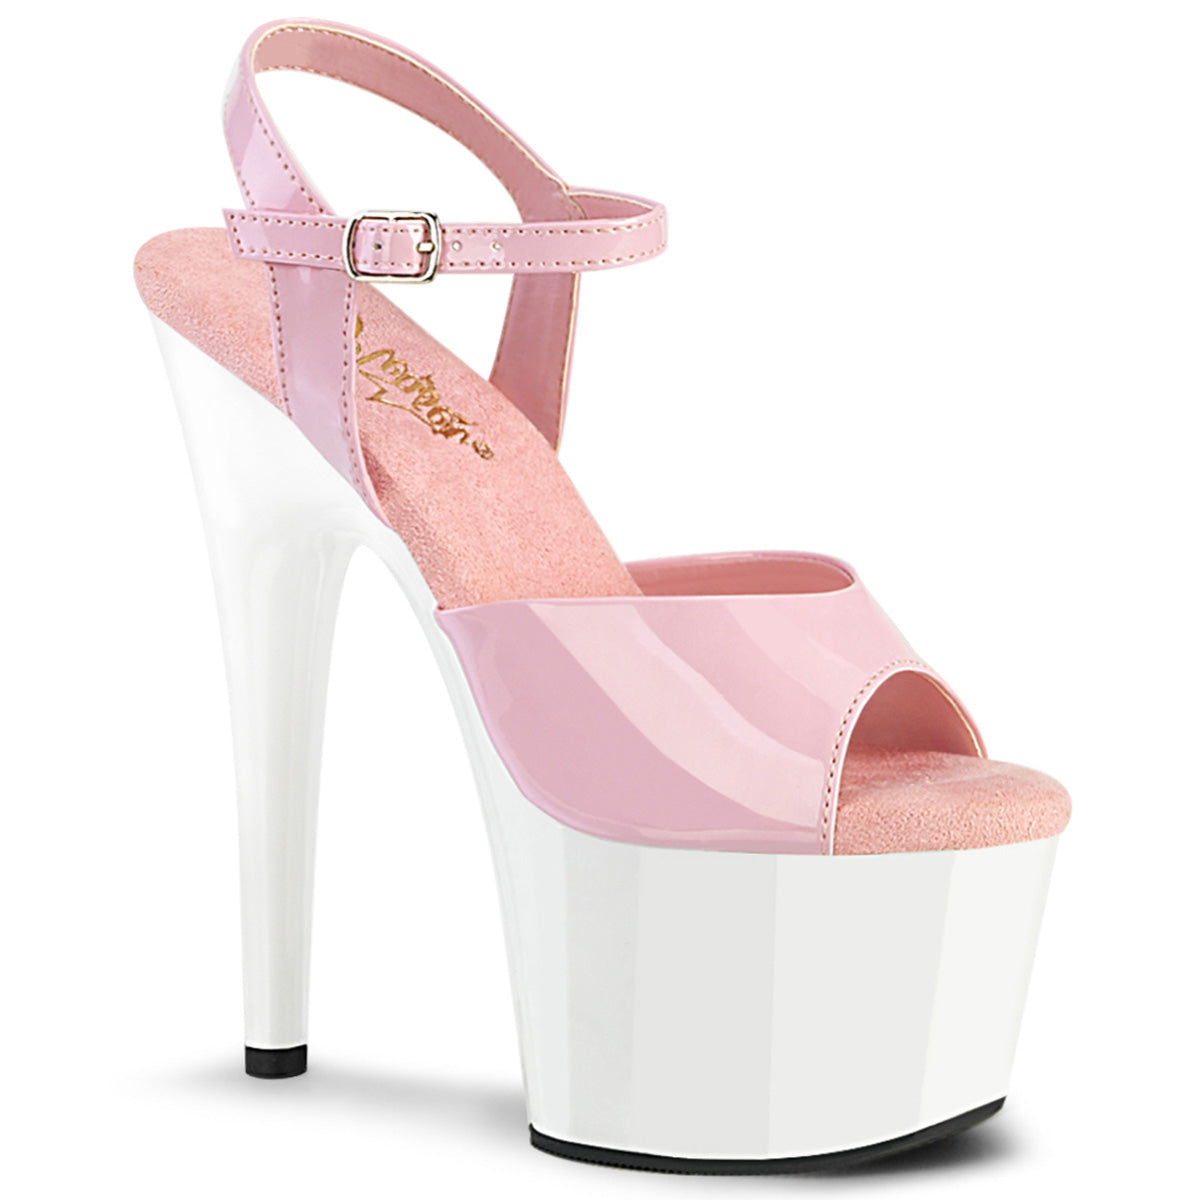 Pleaser | Adore-709LS, 7 Inch Heel Ankle Strap with One Line Rhinestones